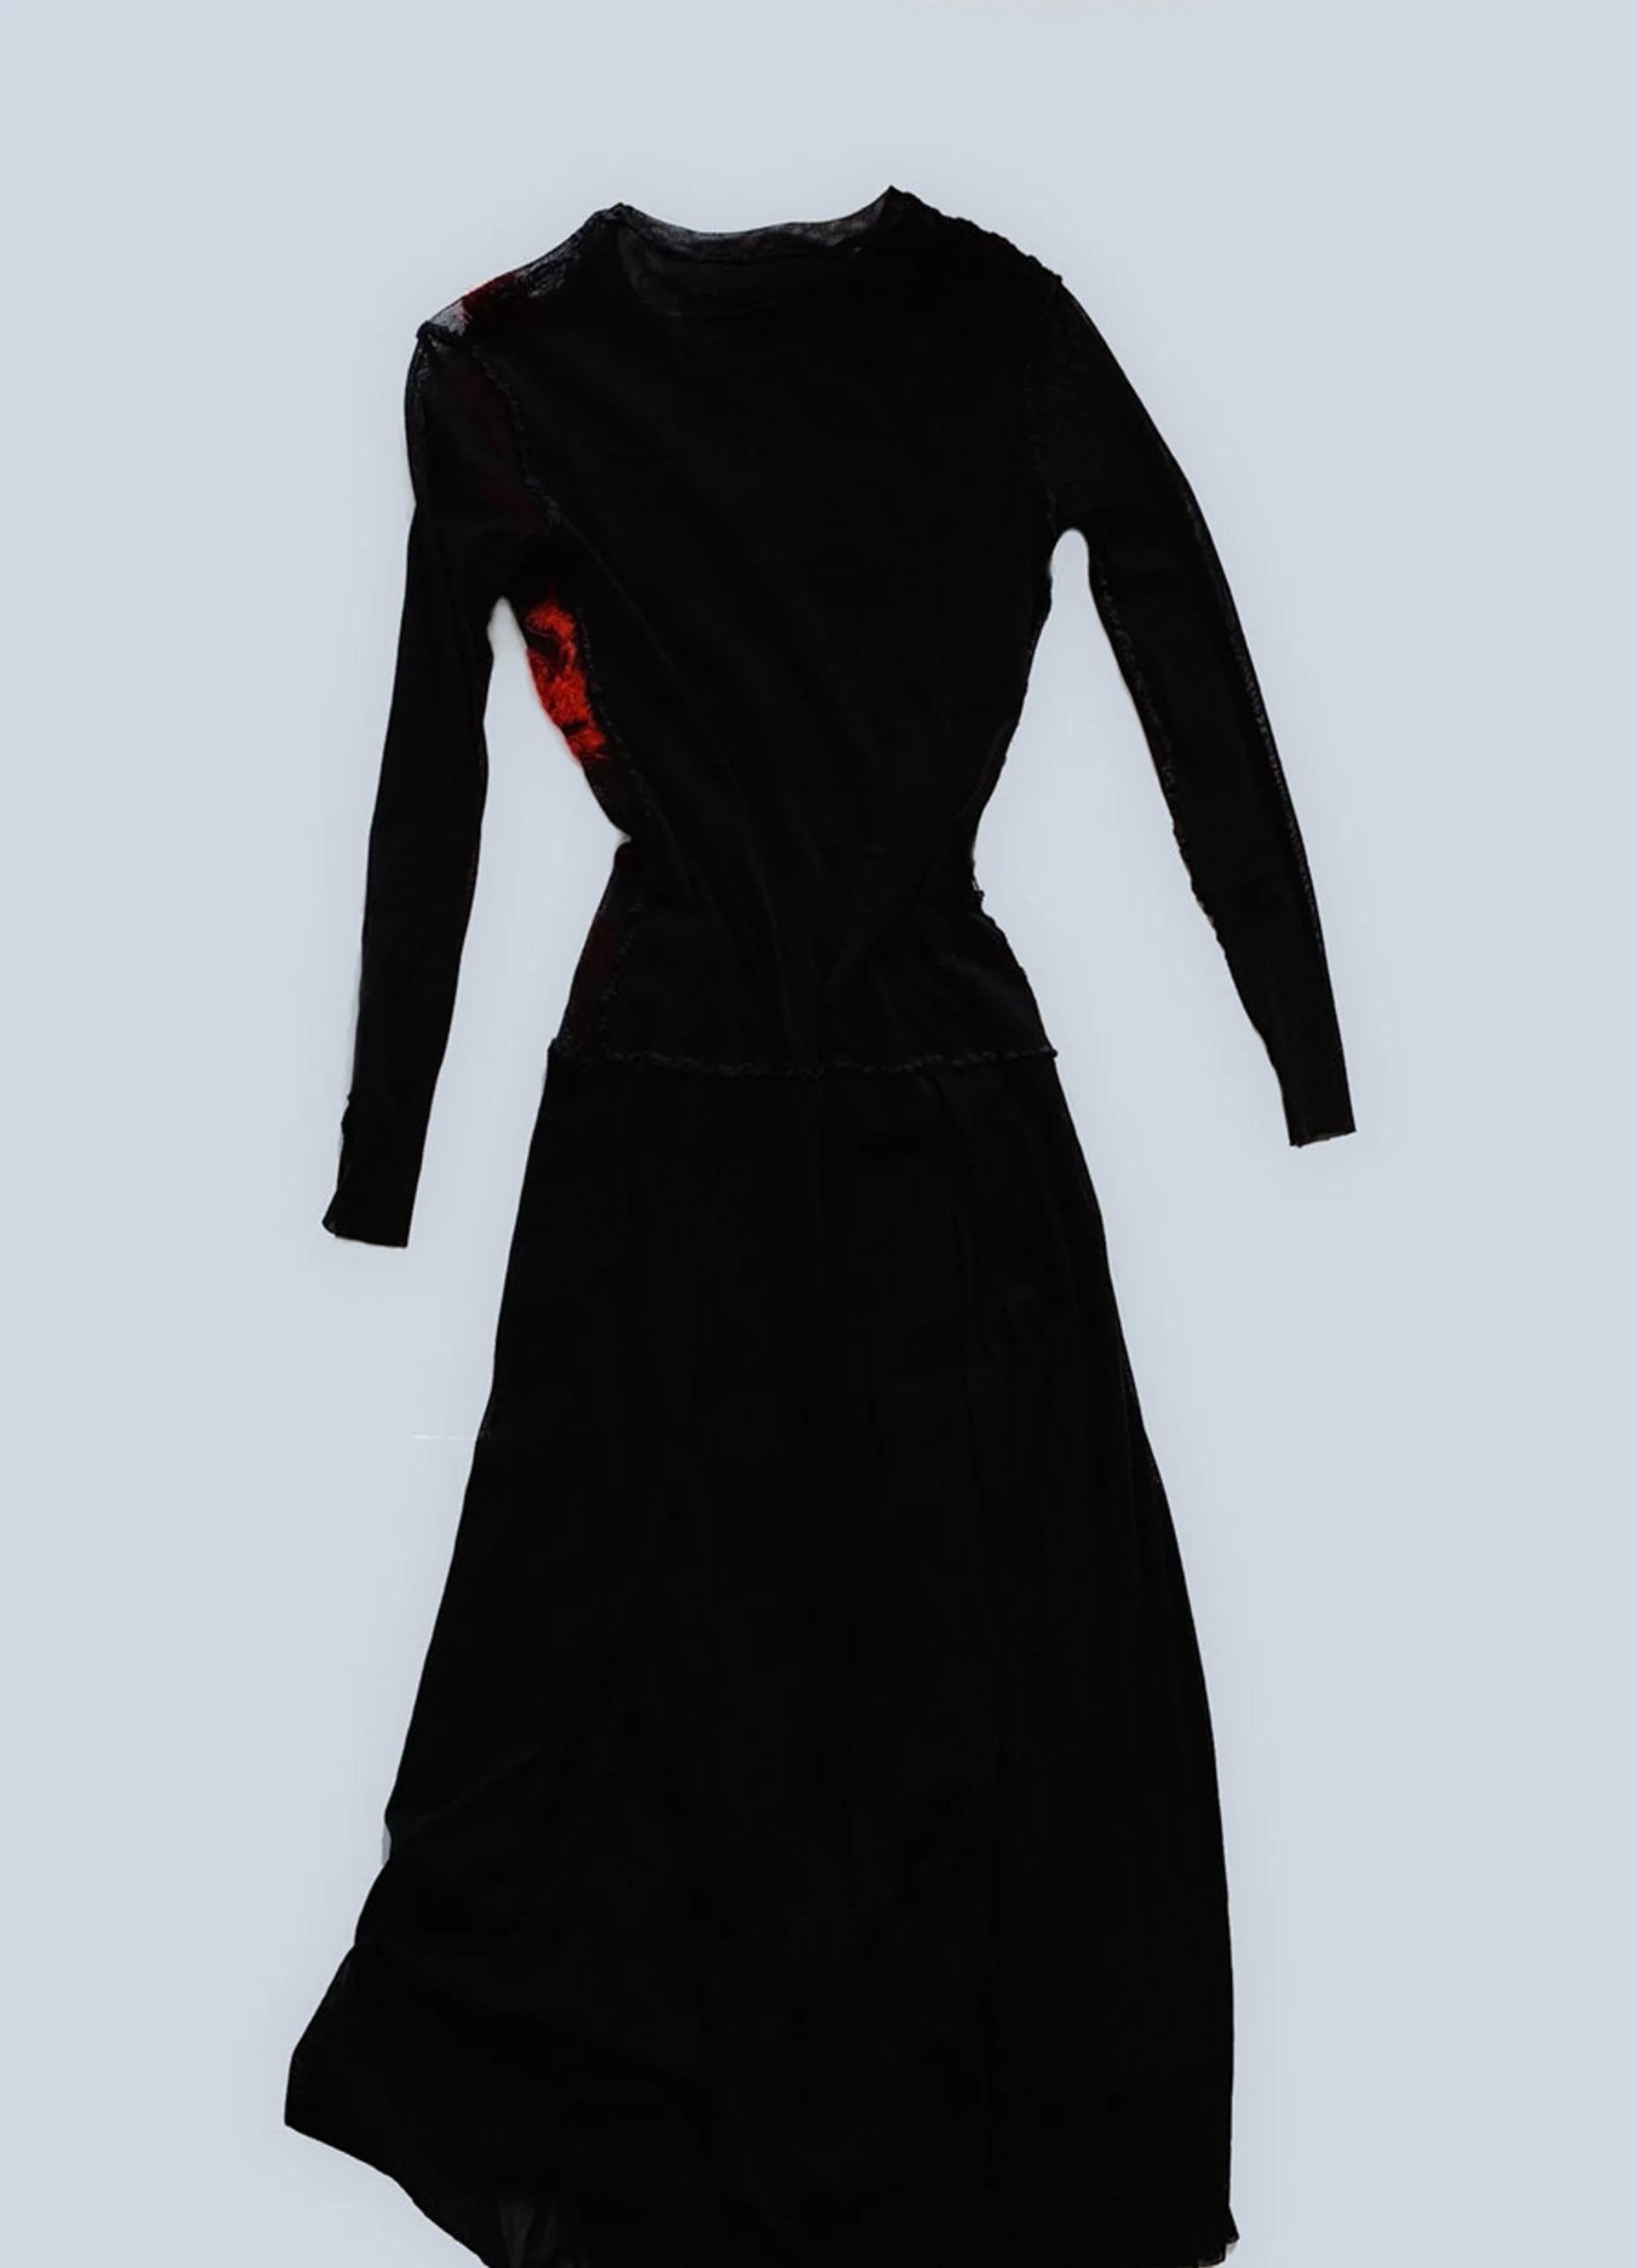 Jean Paul Gaultier Dress Mesh Black Sheer Red Writing Calligraphy 90s Vintage  In Good Condition For Sale In Berlin, BE